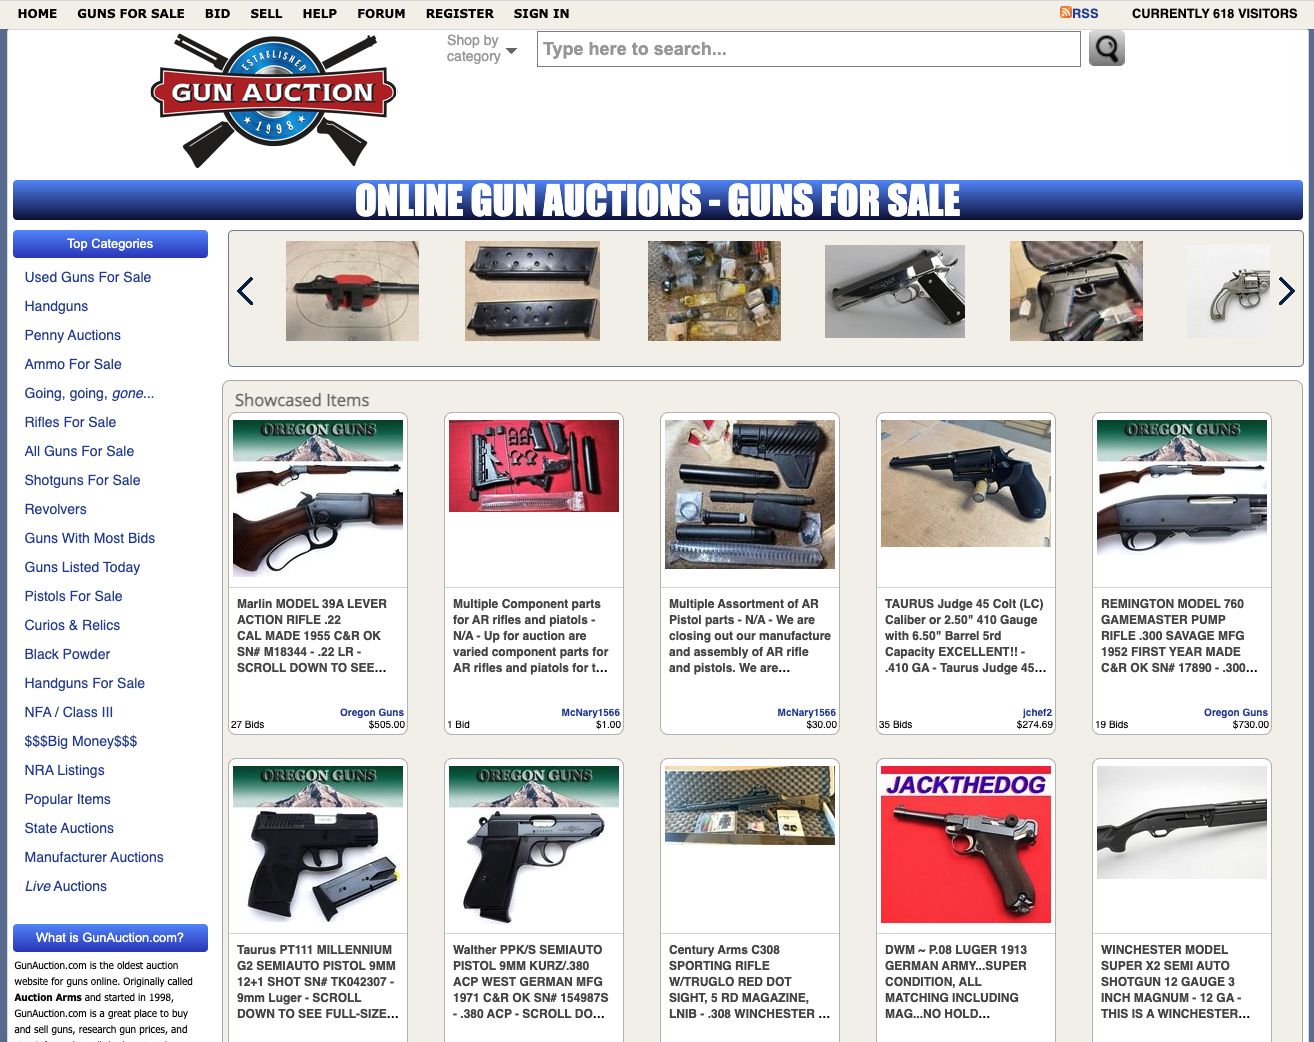 Hackers steal gun owners’ data from firearm auction website